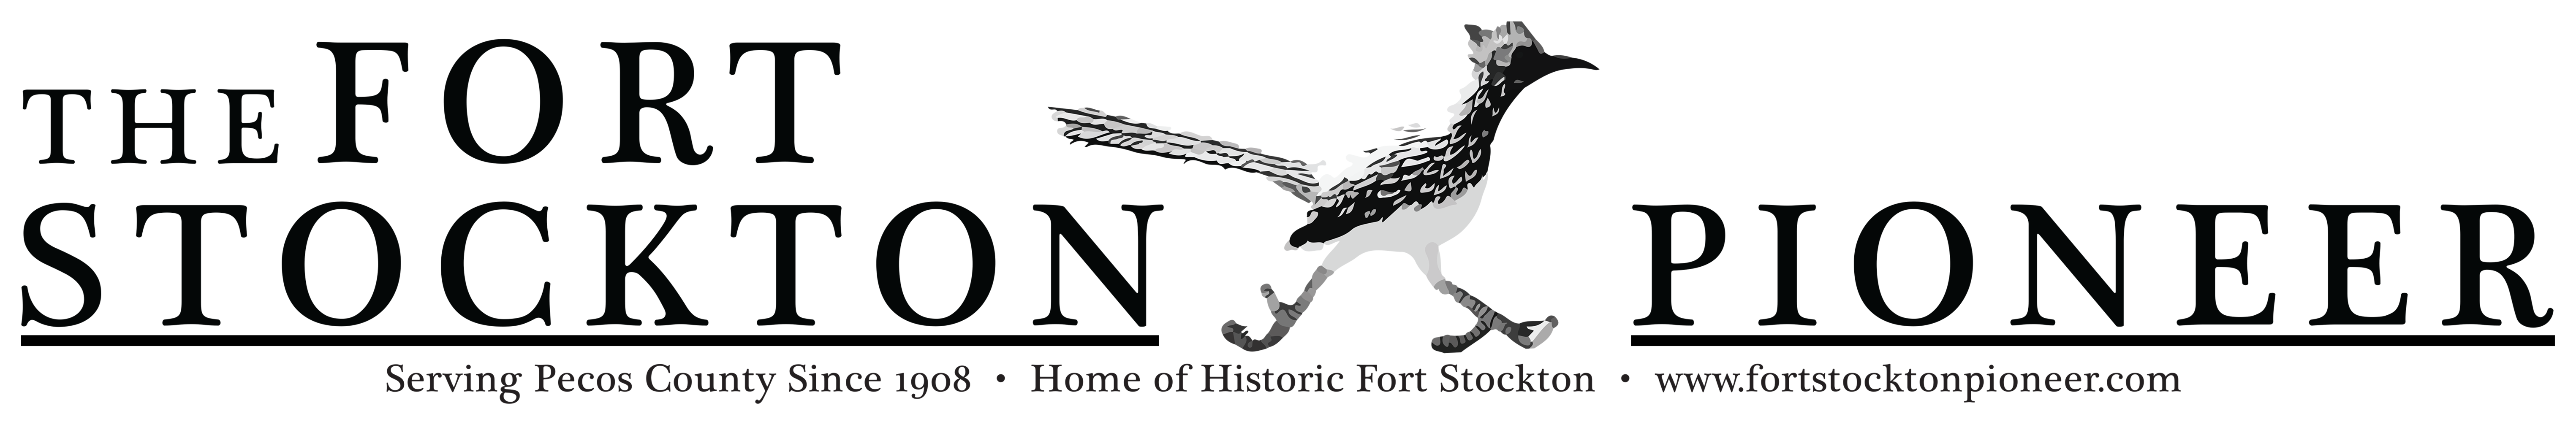 City Council furthers Spring Project | Fort Stockton Pioneer